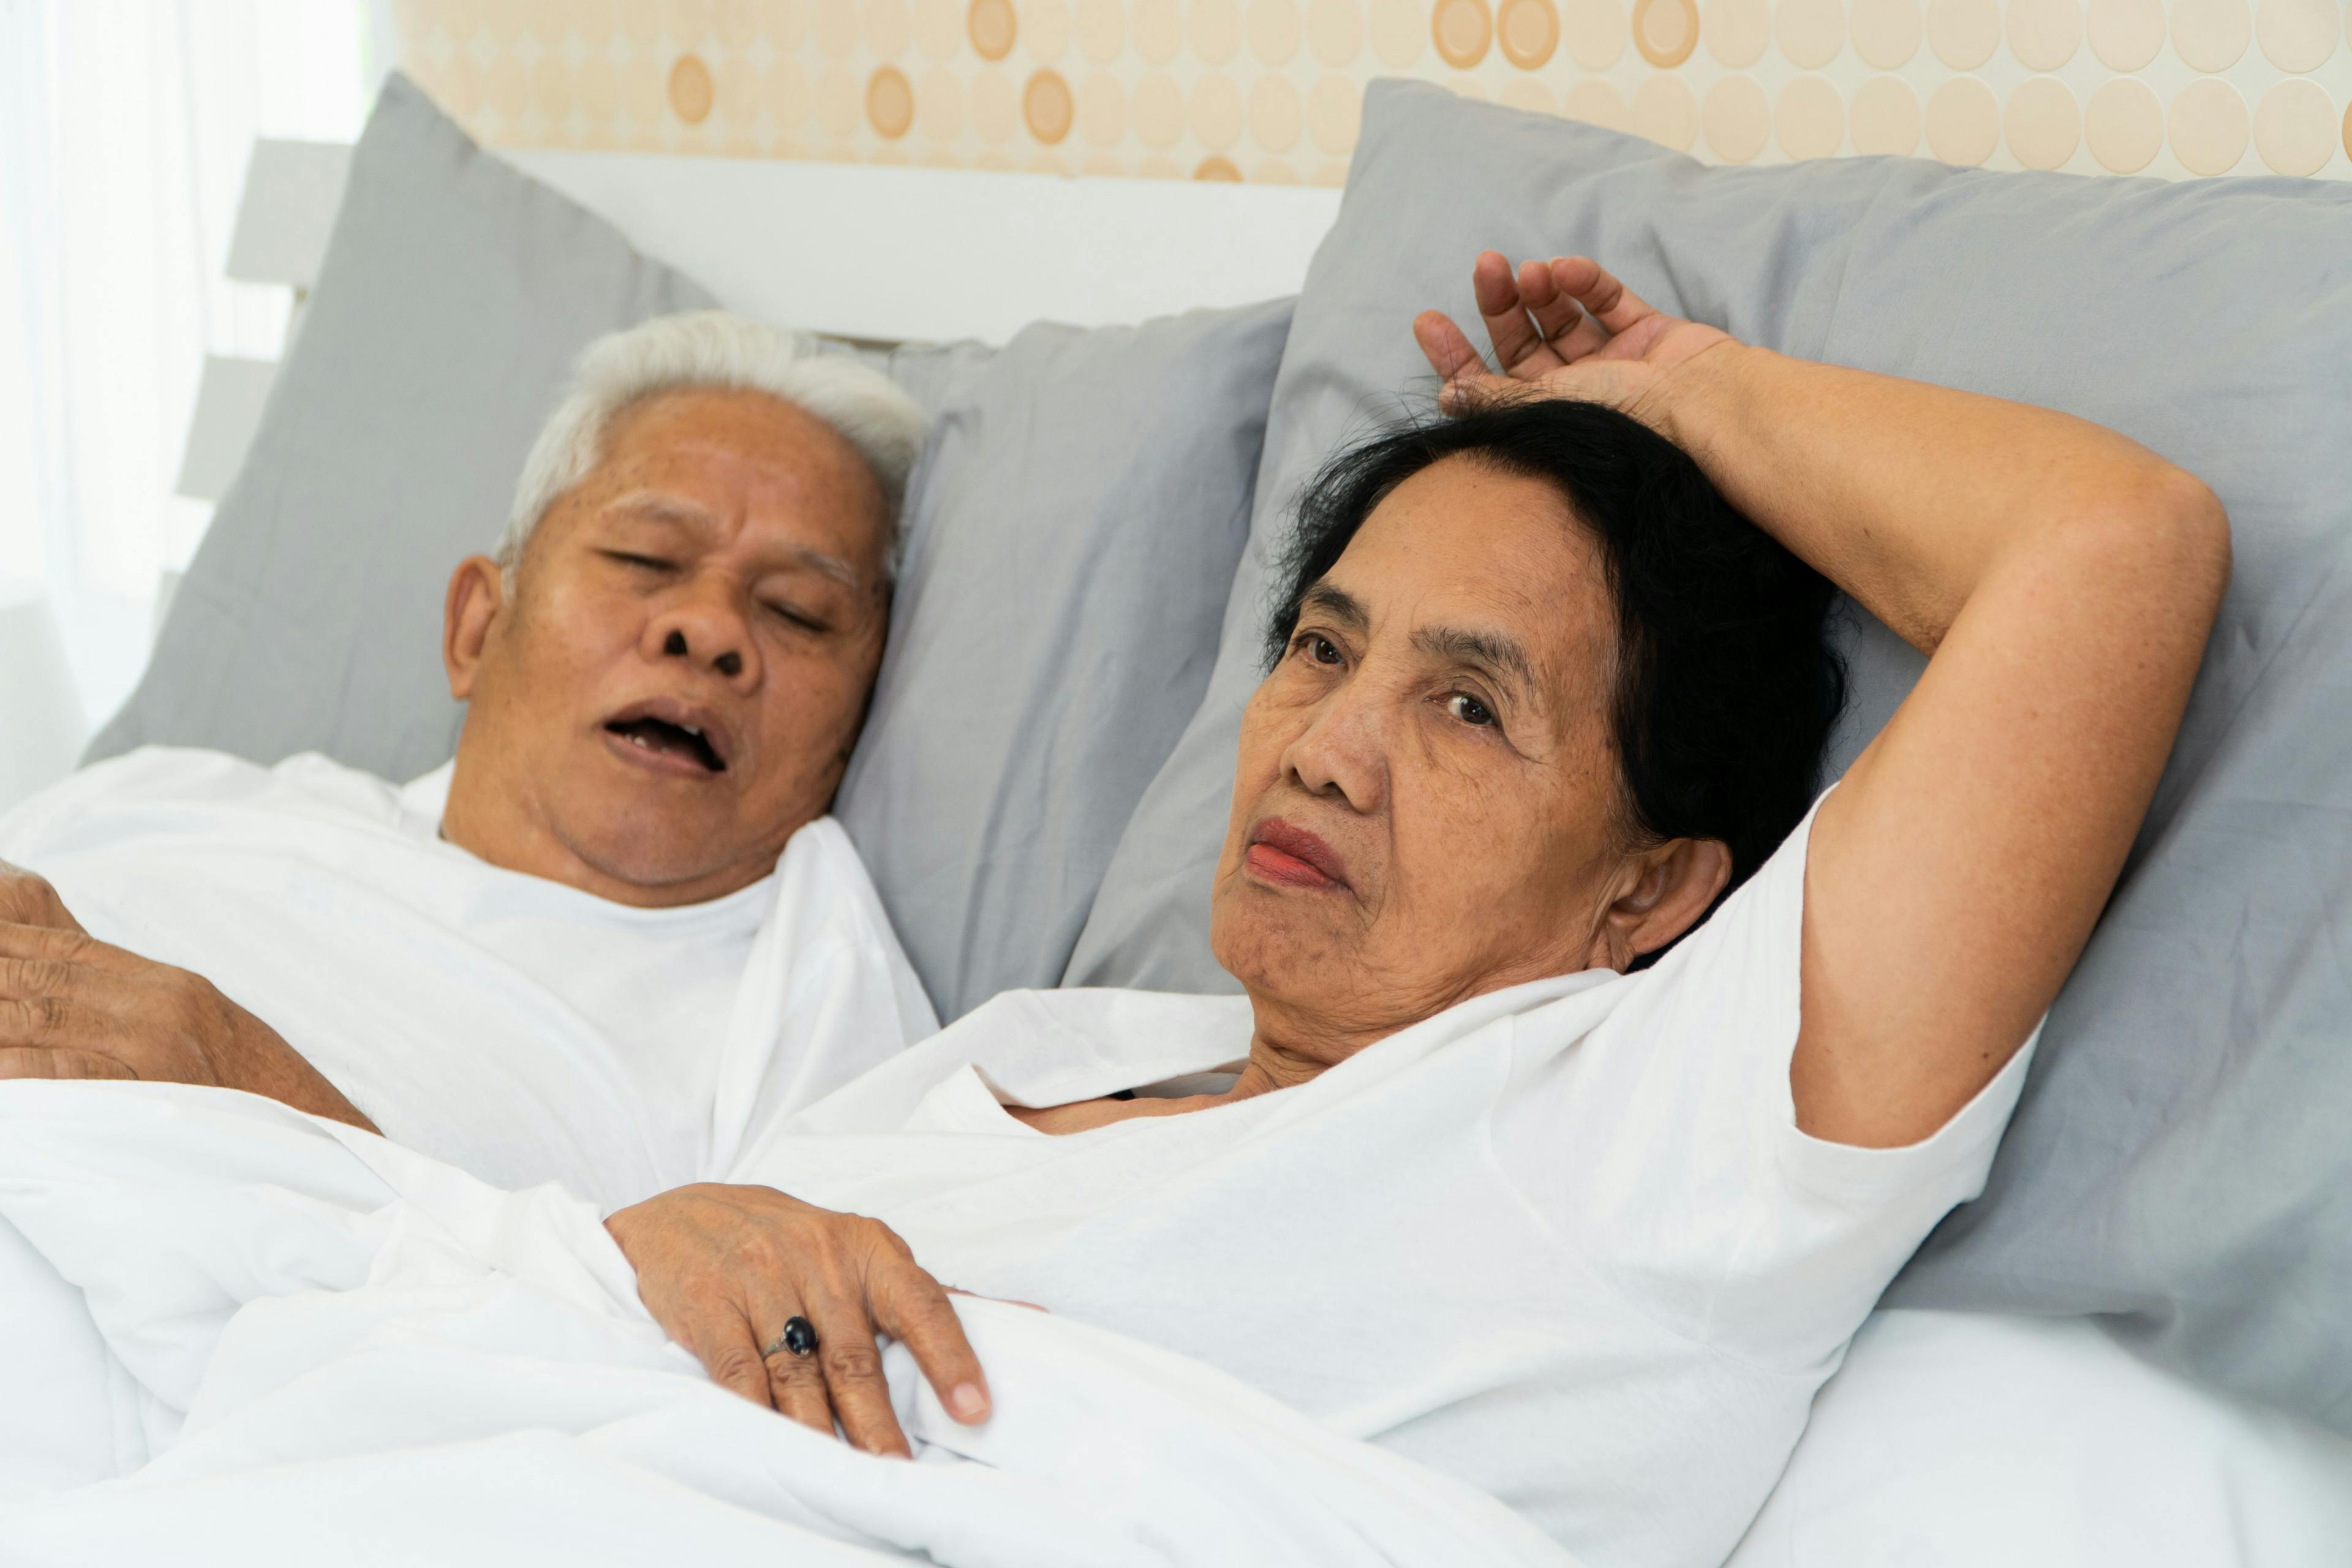 Breathing Issues Linked to Disrupted Sleep Among Older Adults 